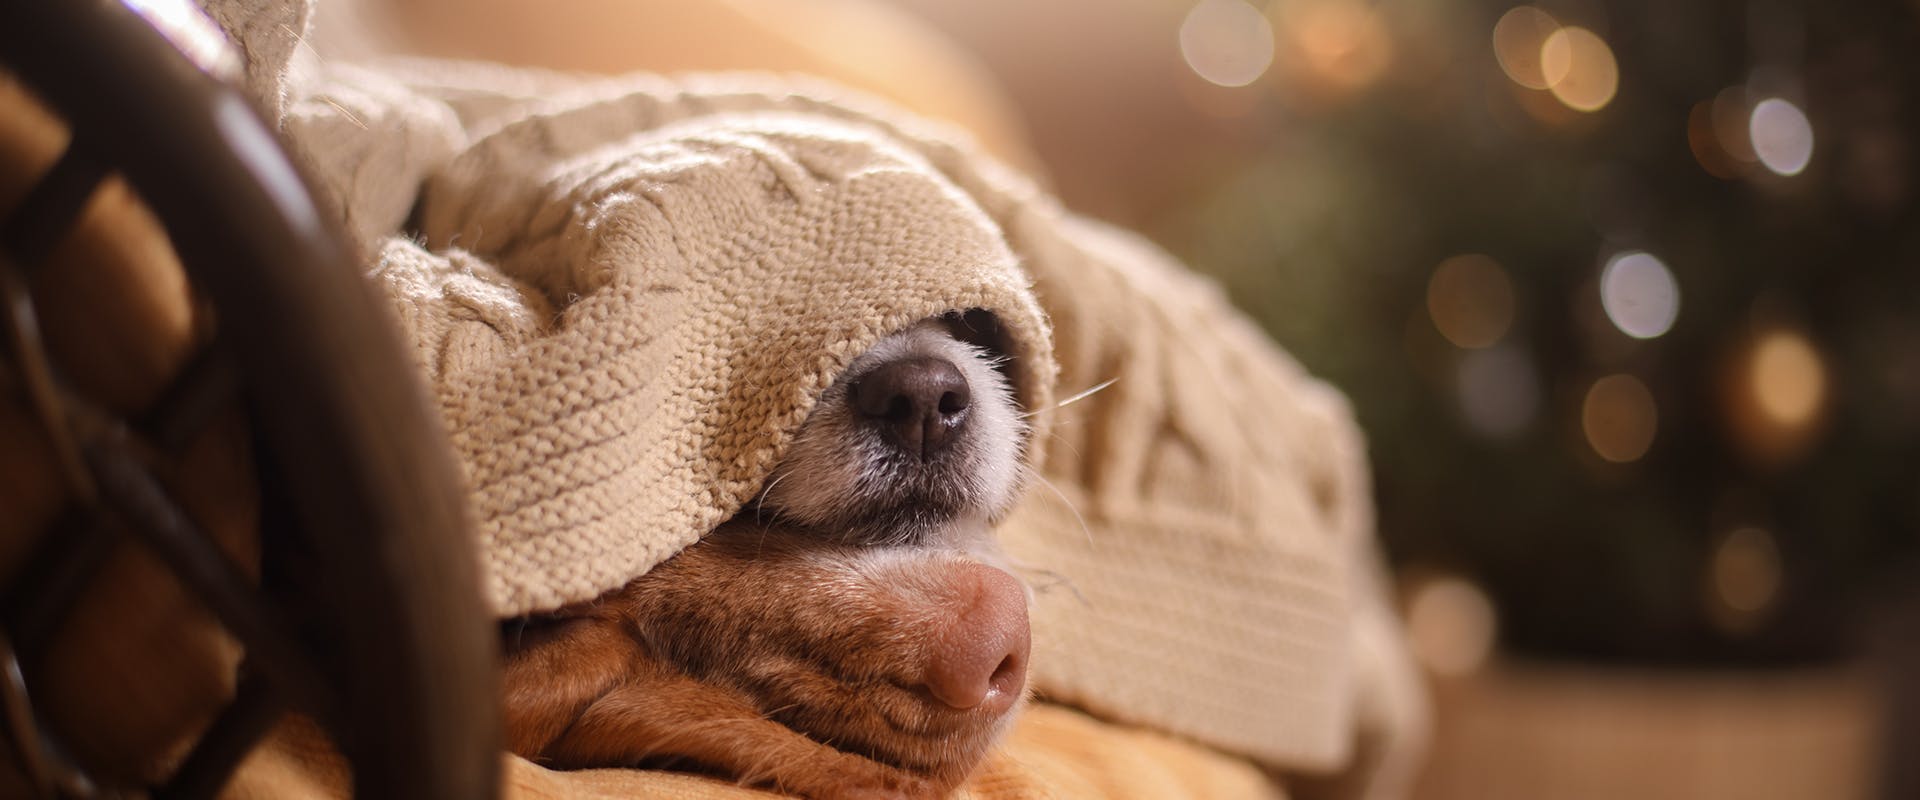 A dog snuggled under a blanket, just its nose showing. A lit Christmas tree in the background